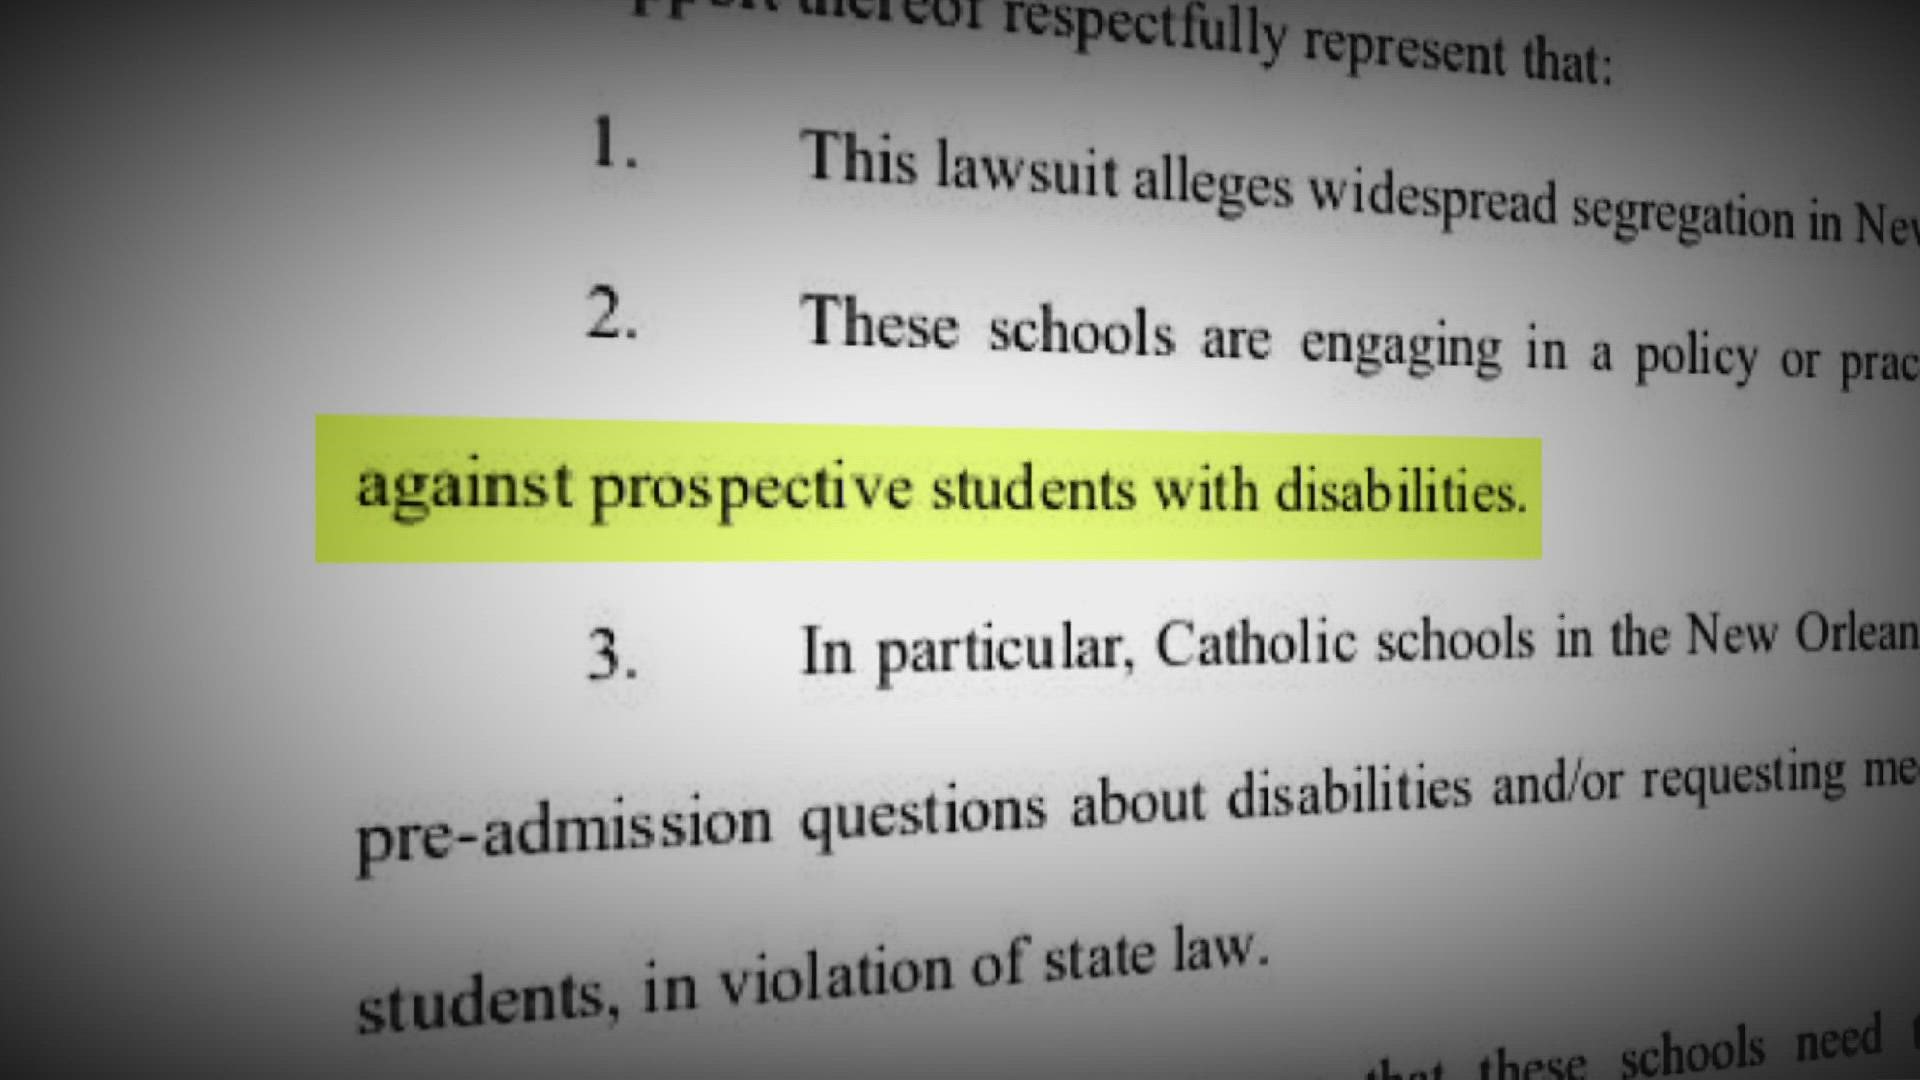 This comes after a WWL investigation looked at claims in a class-action lawsuit in August alleging that Catholic schools discriminated against prospective students.